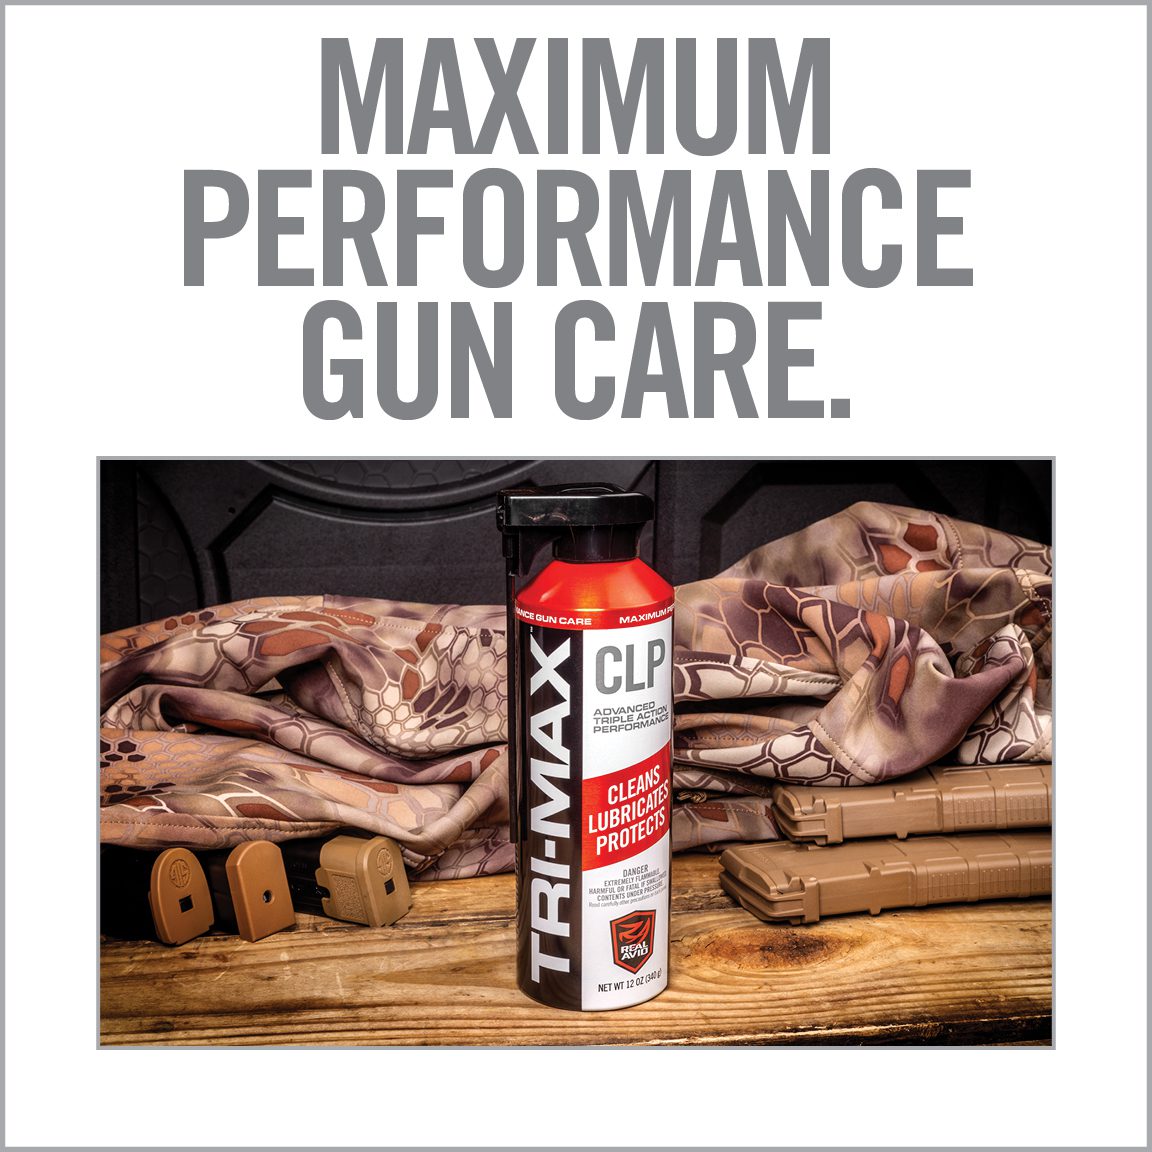 an ad for the gun care product